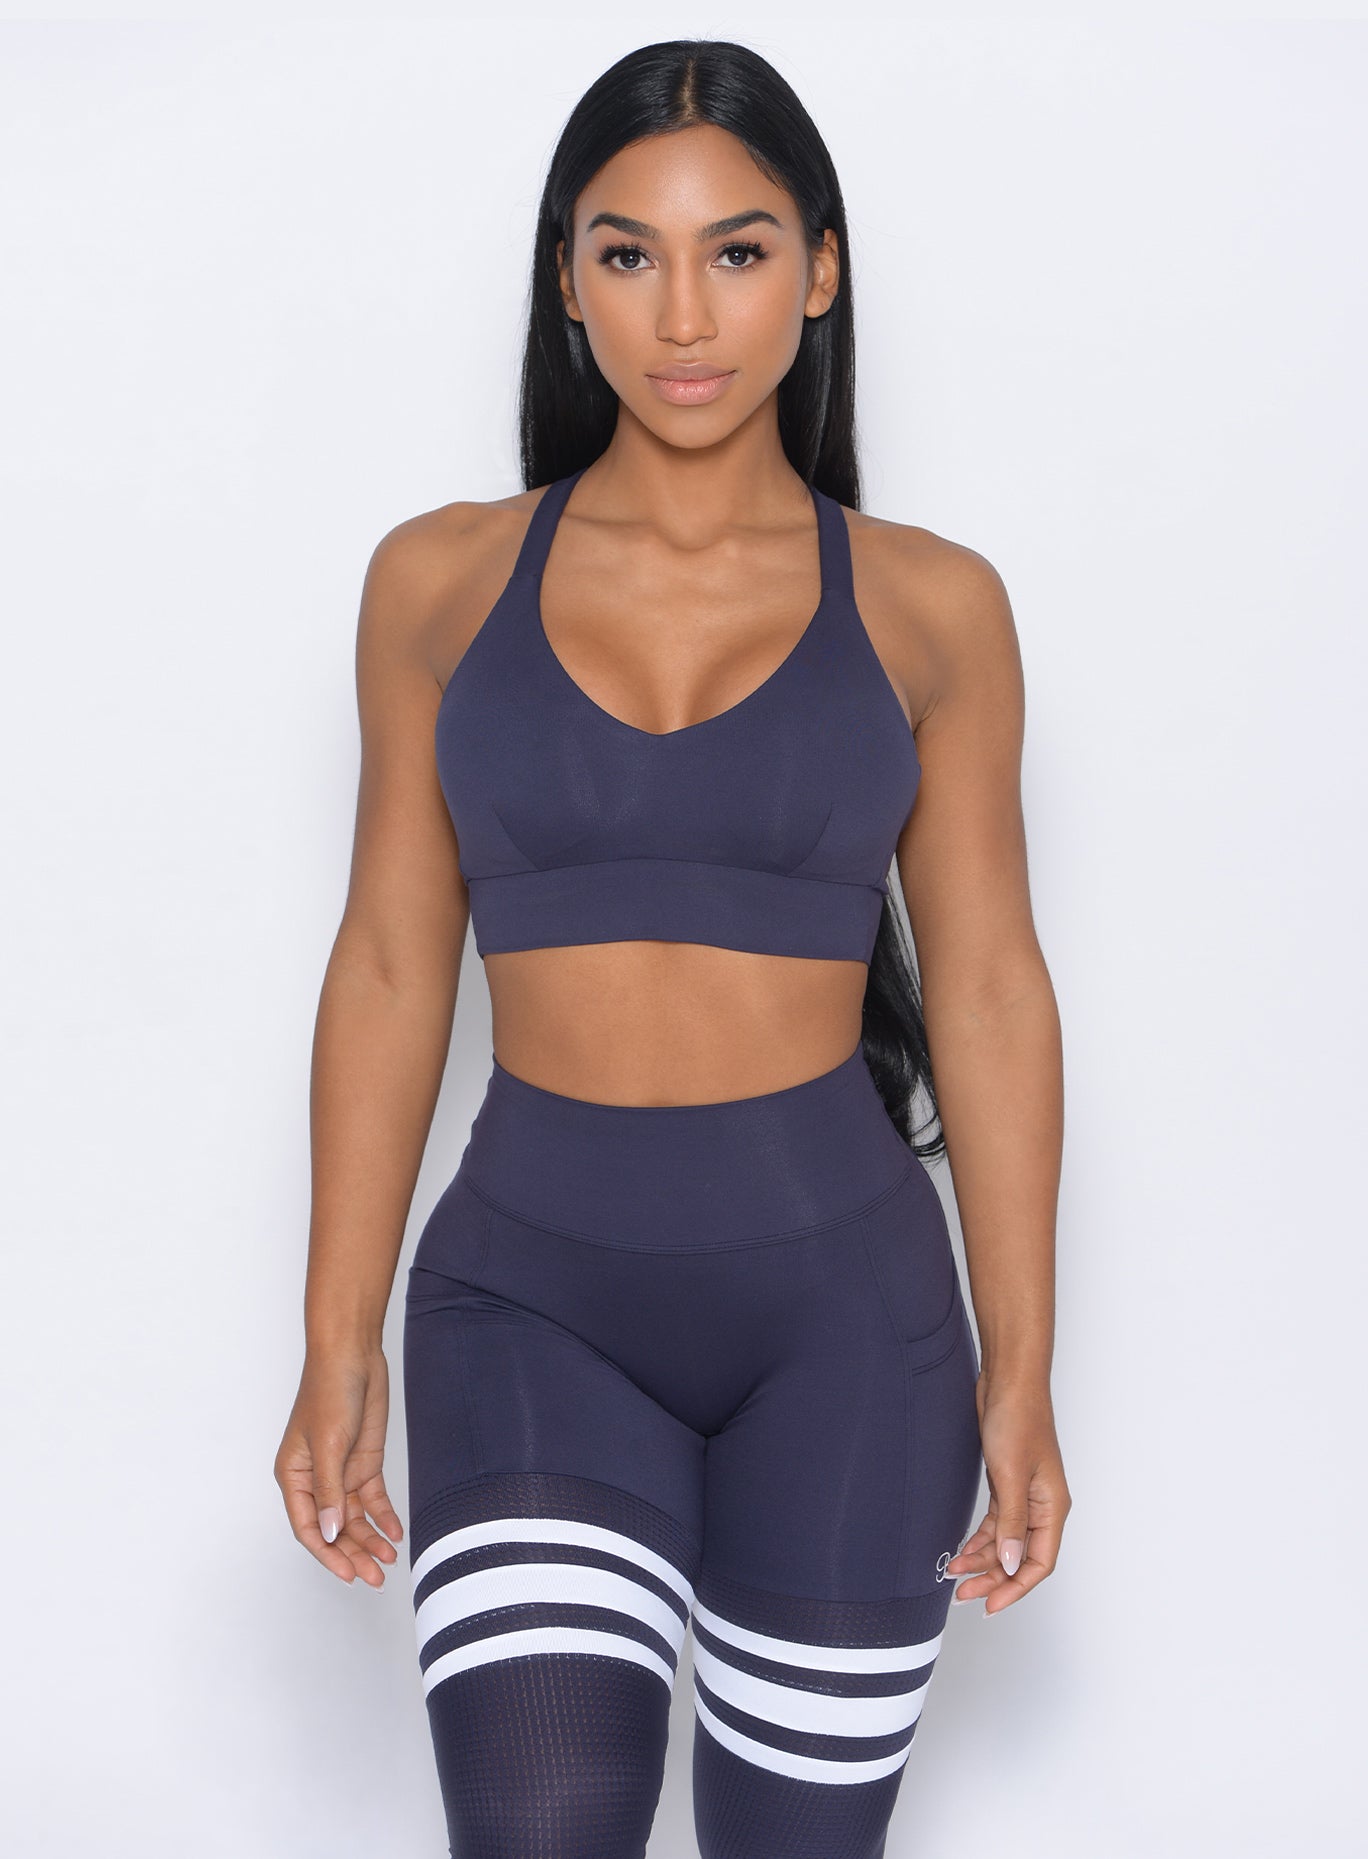 Front profile view of the model wearing  our synergy sports bra in twilight blue color and a matching leggings